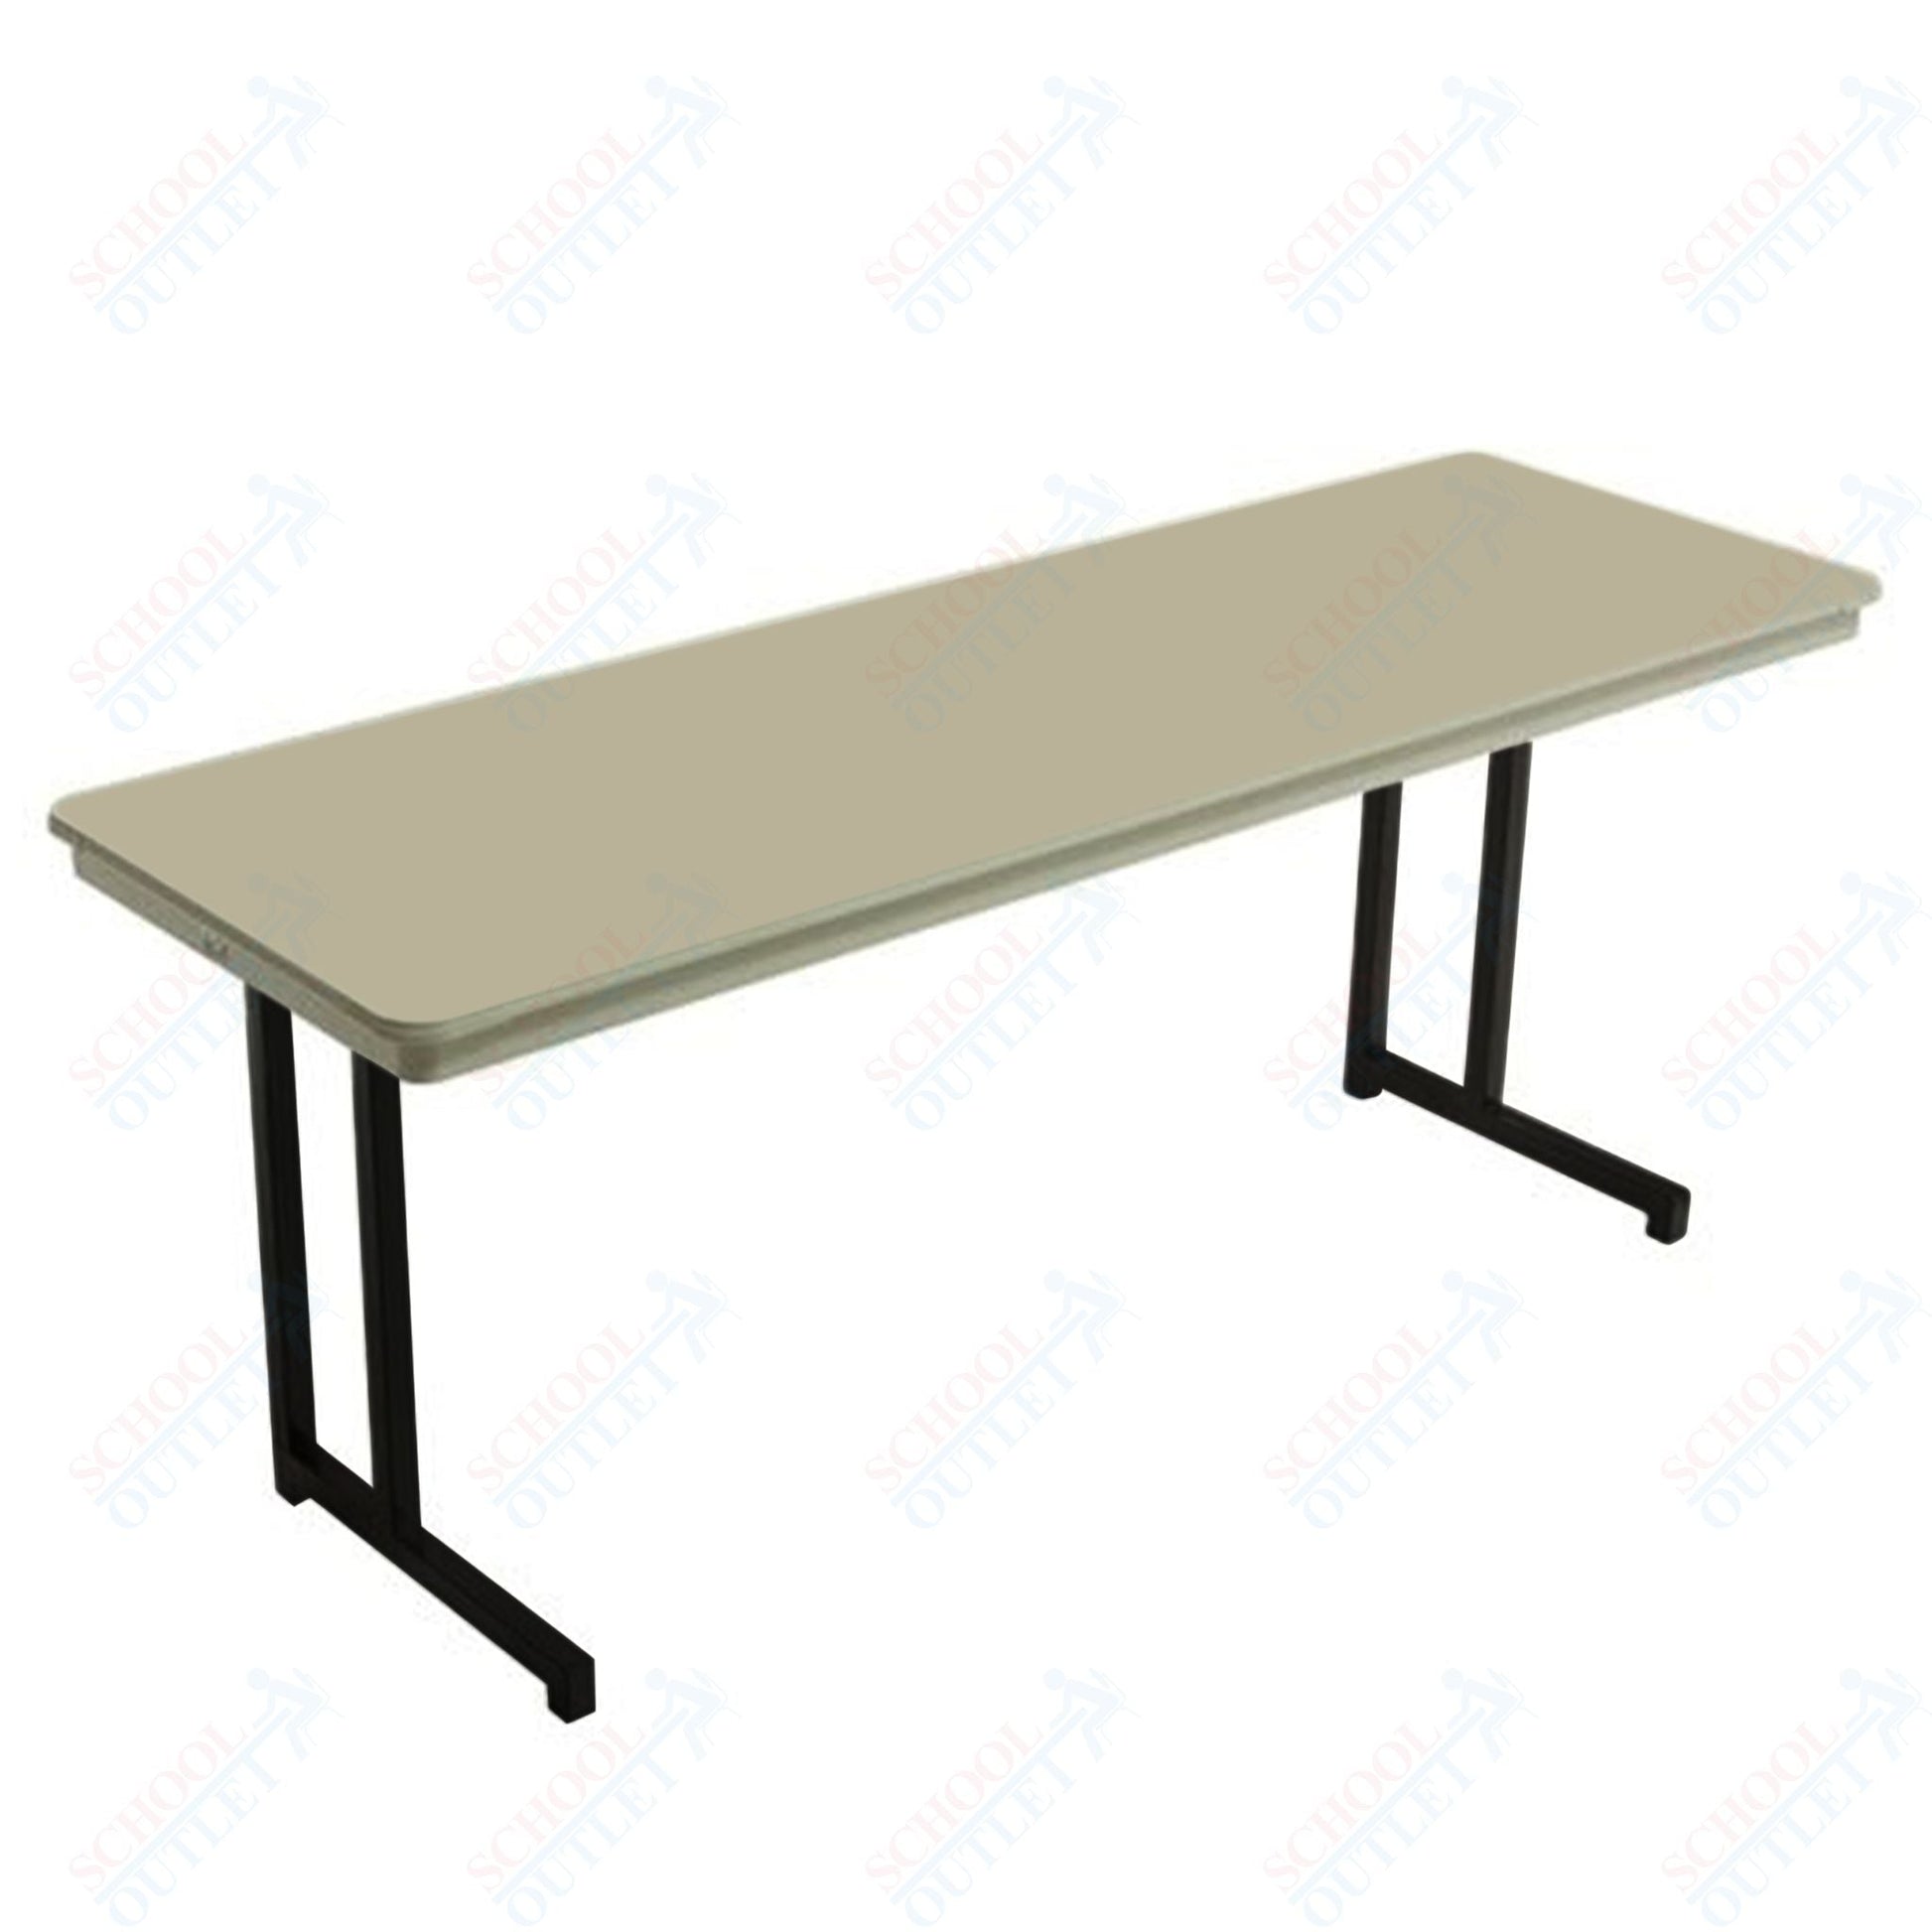 AmTab Dynalite Featherweight Heavy - Duty ABS Plastic Training Table - Rectangle - 24"W x 72"L x 29"H (AmTab AMT - TT246DL) - SchoolOutlet